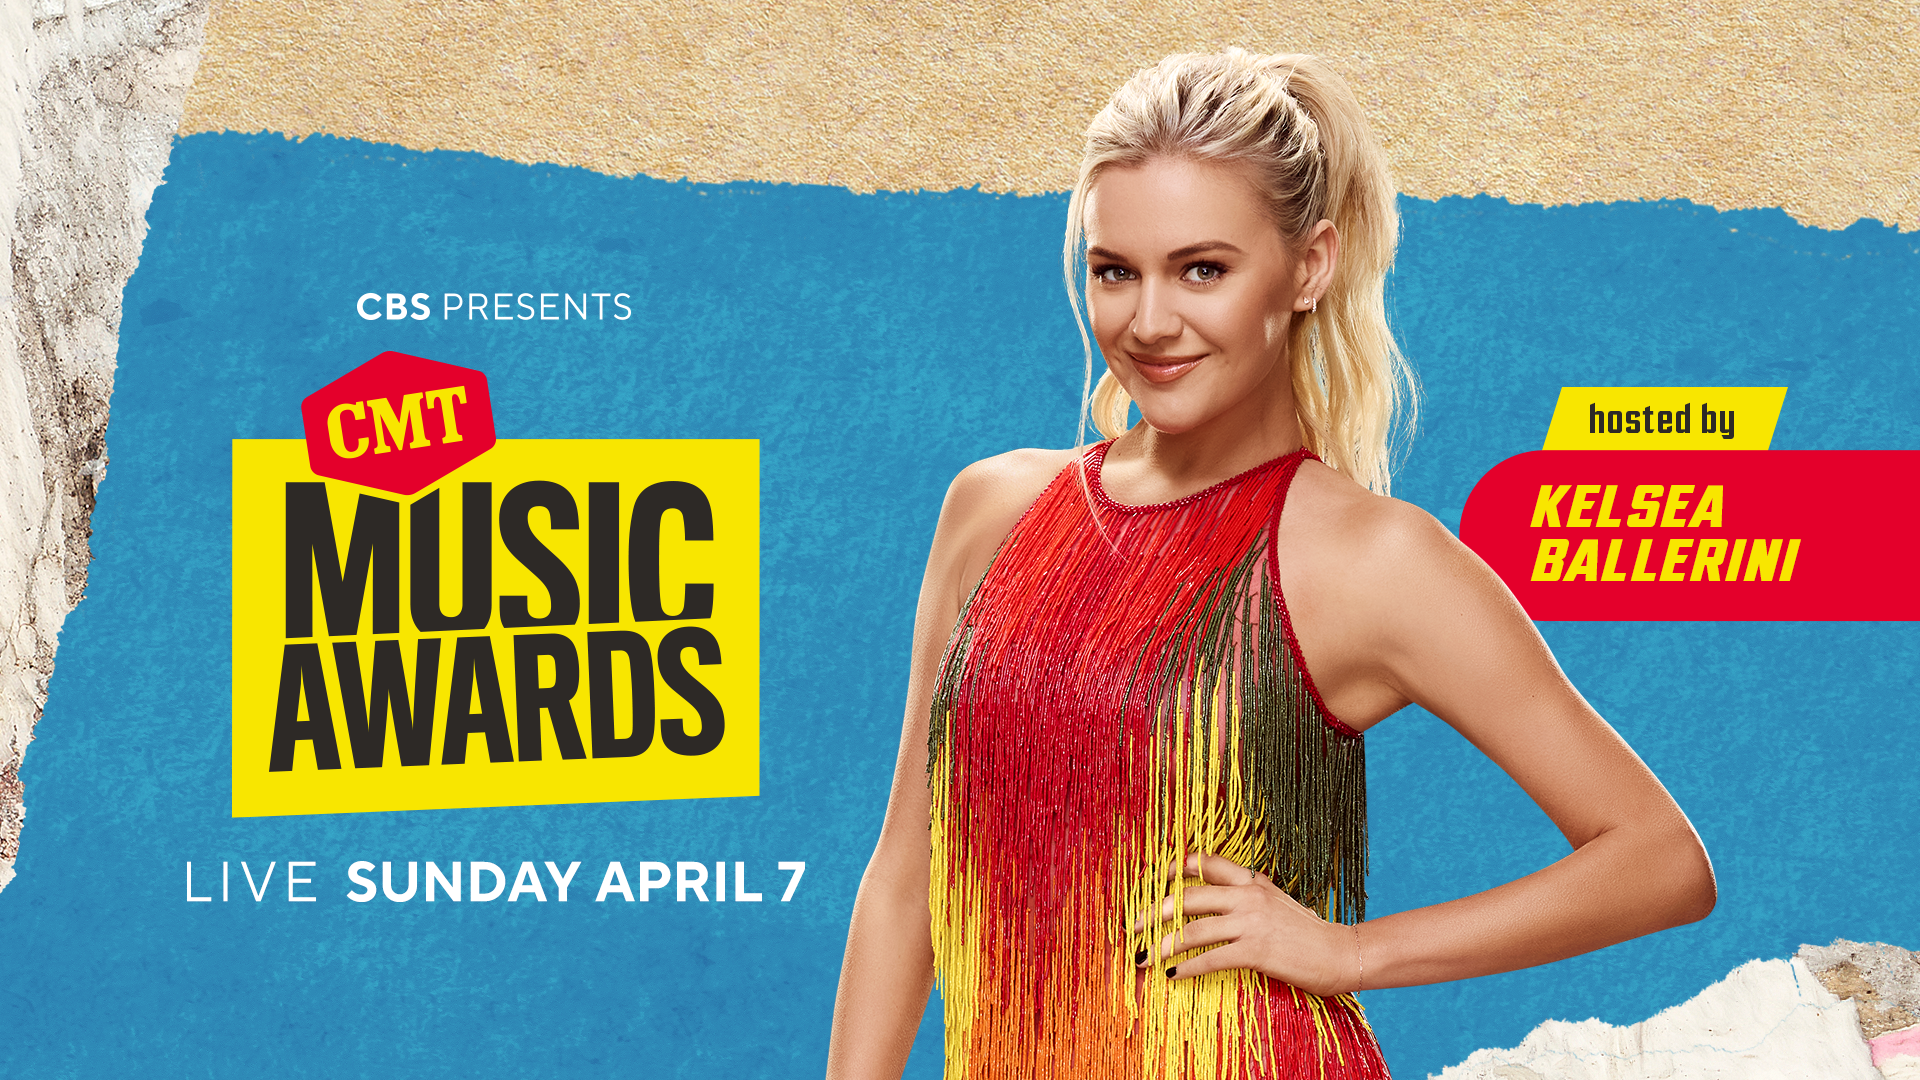 CMT Music Awards Returns to Austin with Packed Show